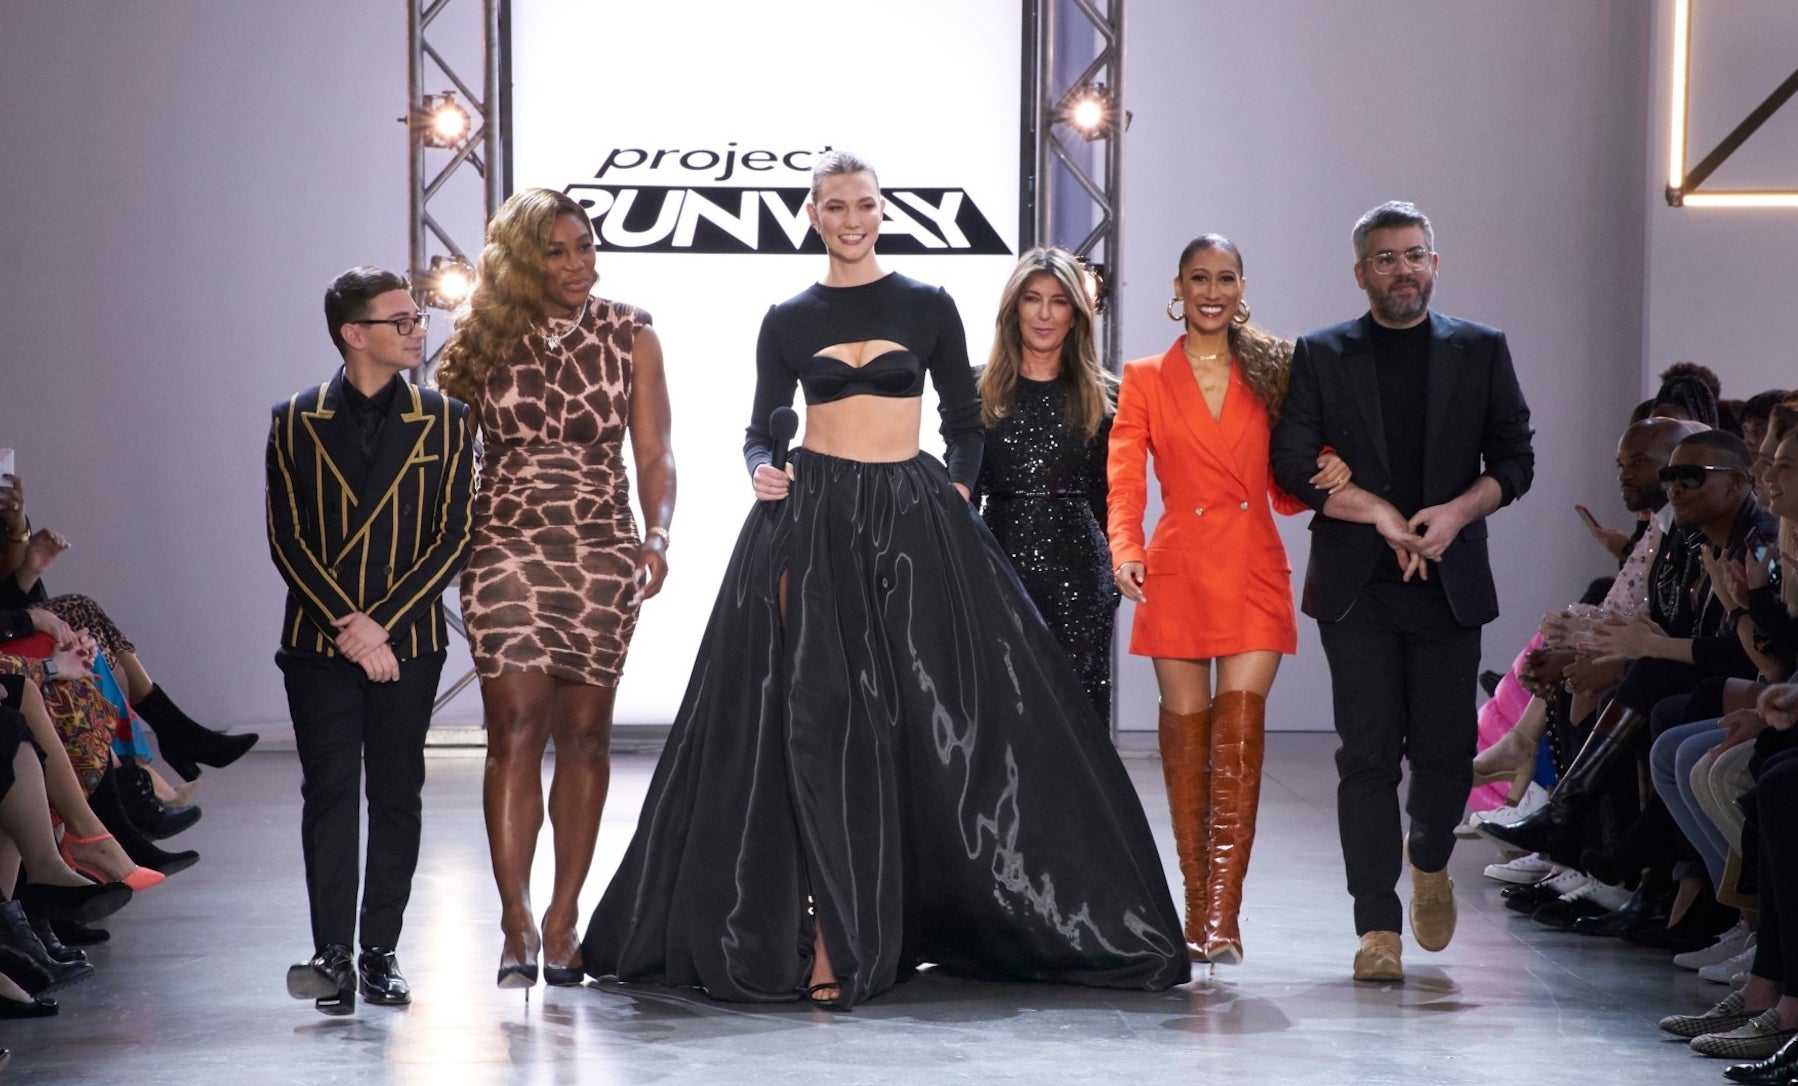 Five people on a runway; three women in dresses and heels, one woman in a crop top and skirt, and a man in a suit. They are smiling